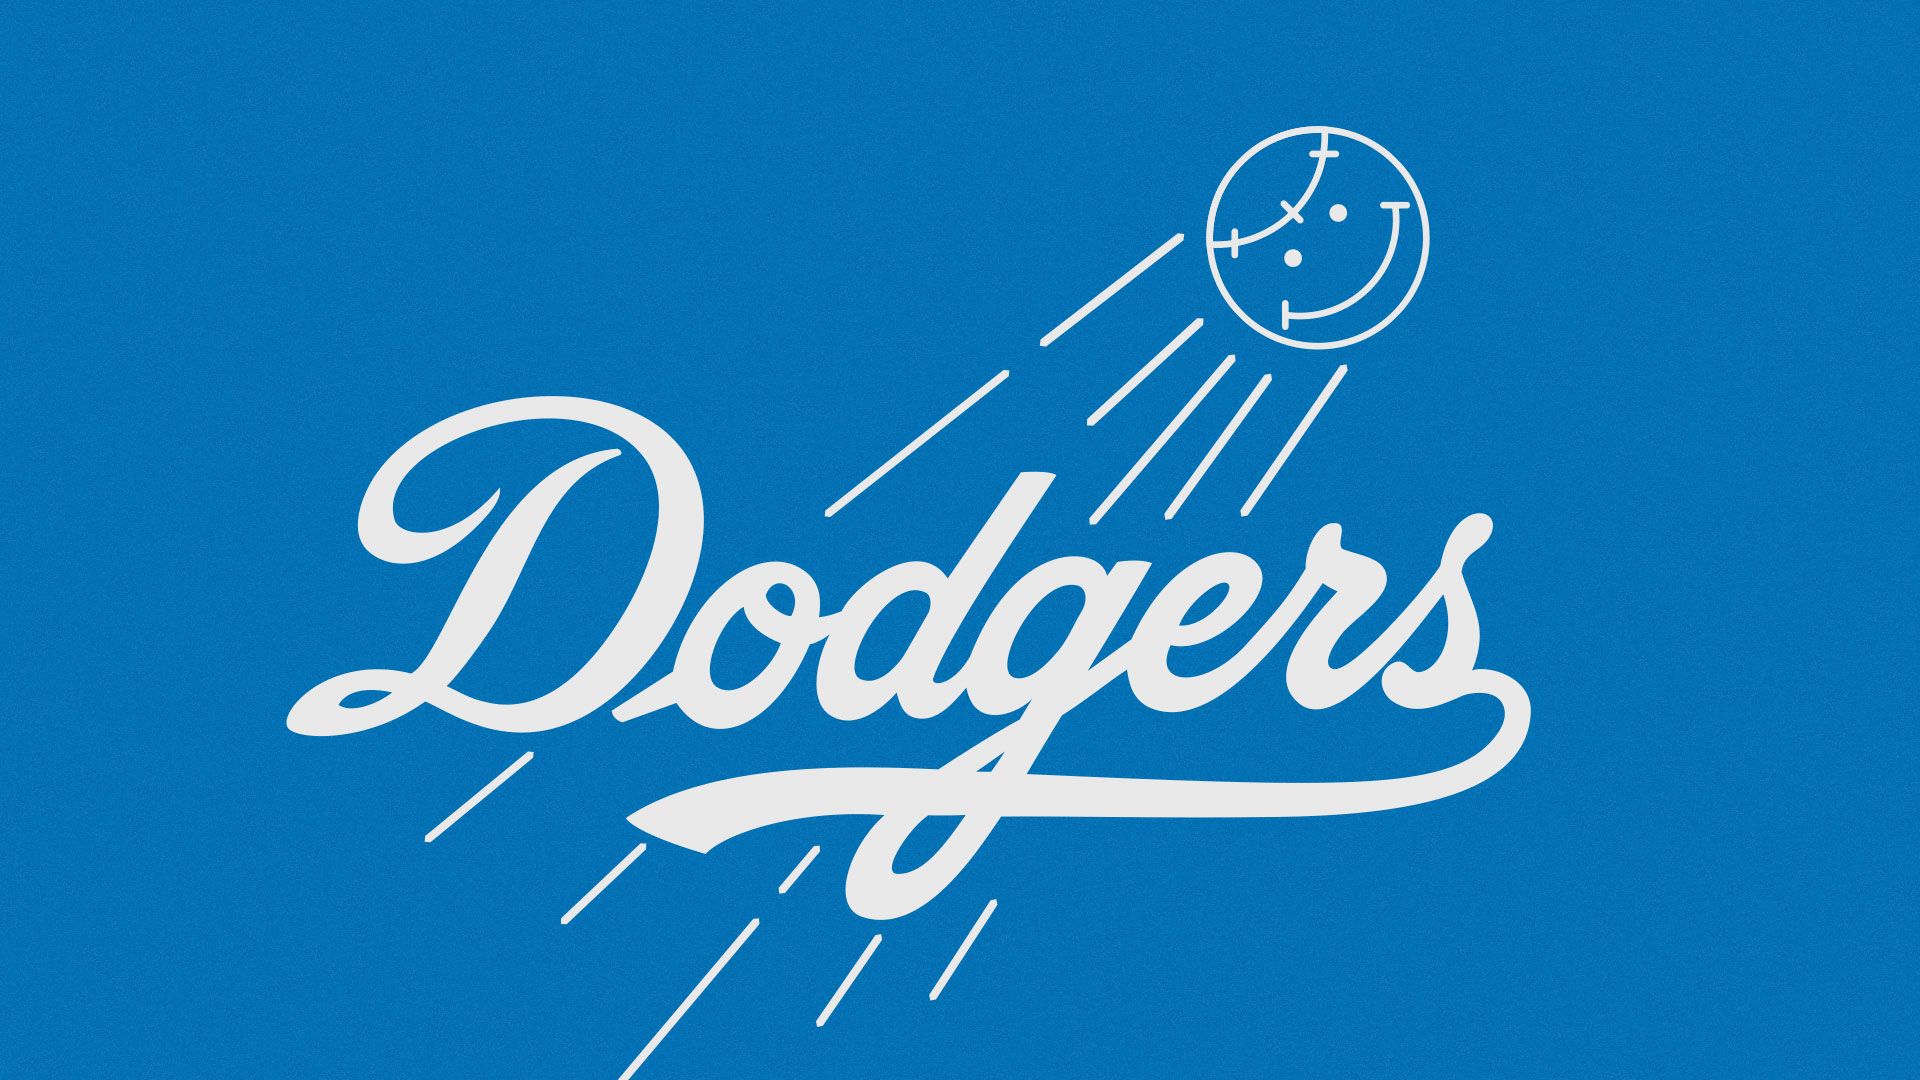 Dodgers logo with smiley face